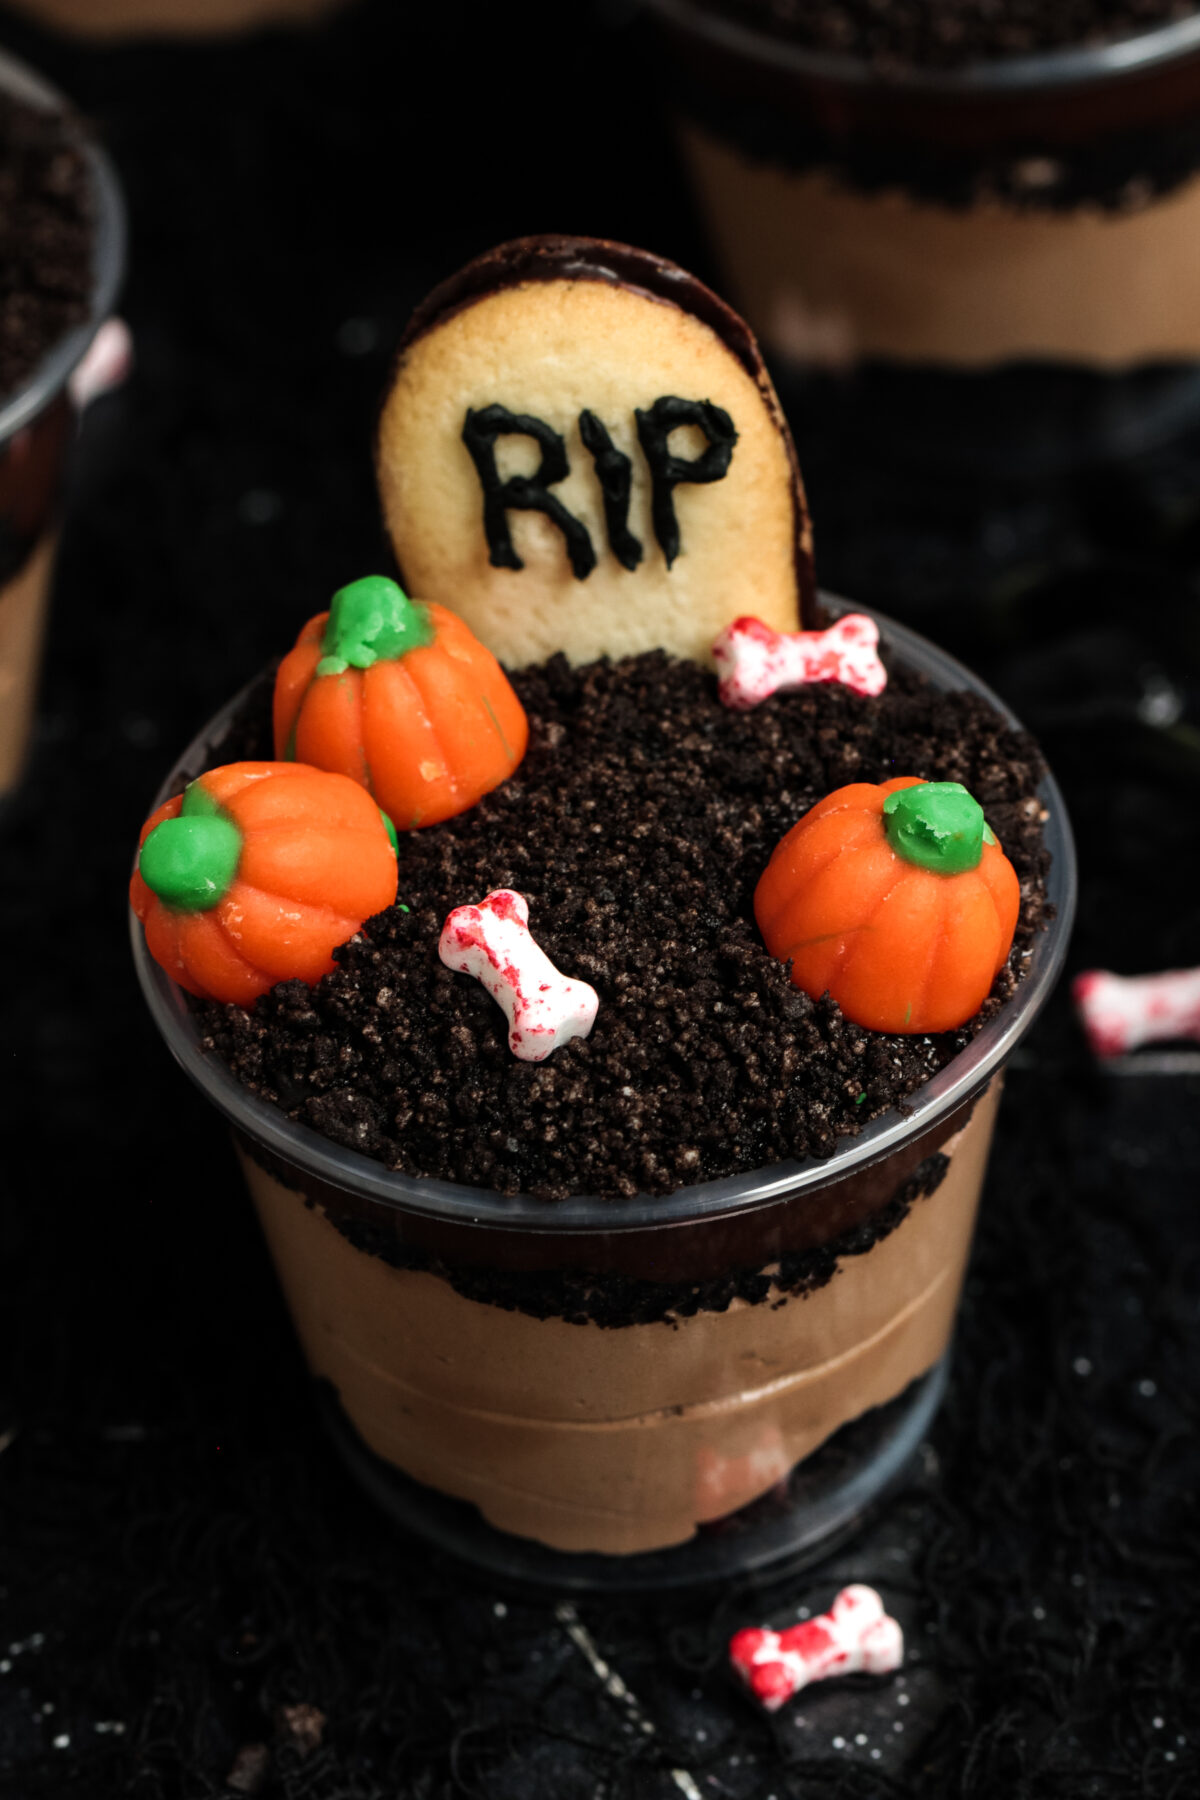 This Halloween Dirt Cups recipe is a fun and spooky treat for kids of all ages, especially for those with a bit of a sweet tooth.